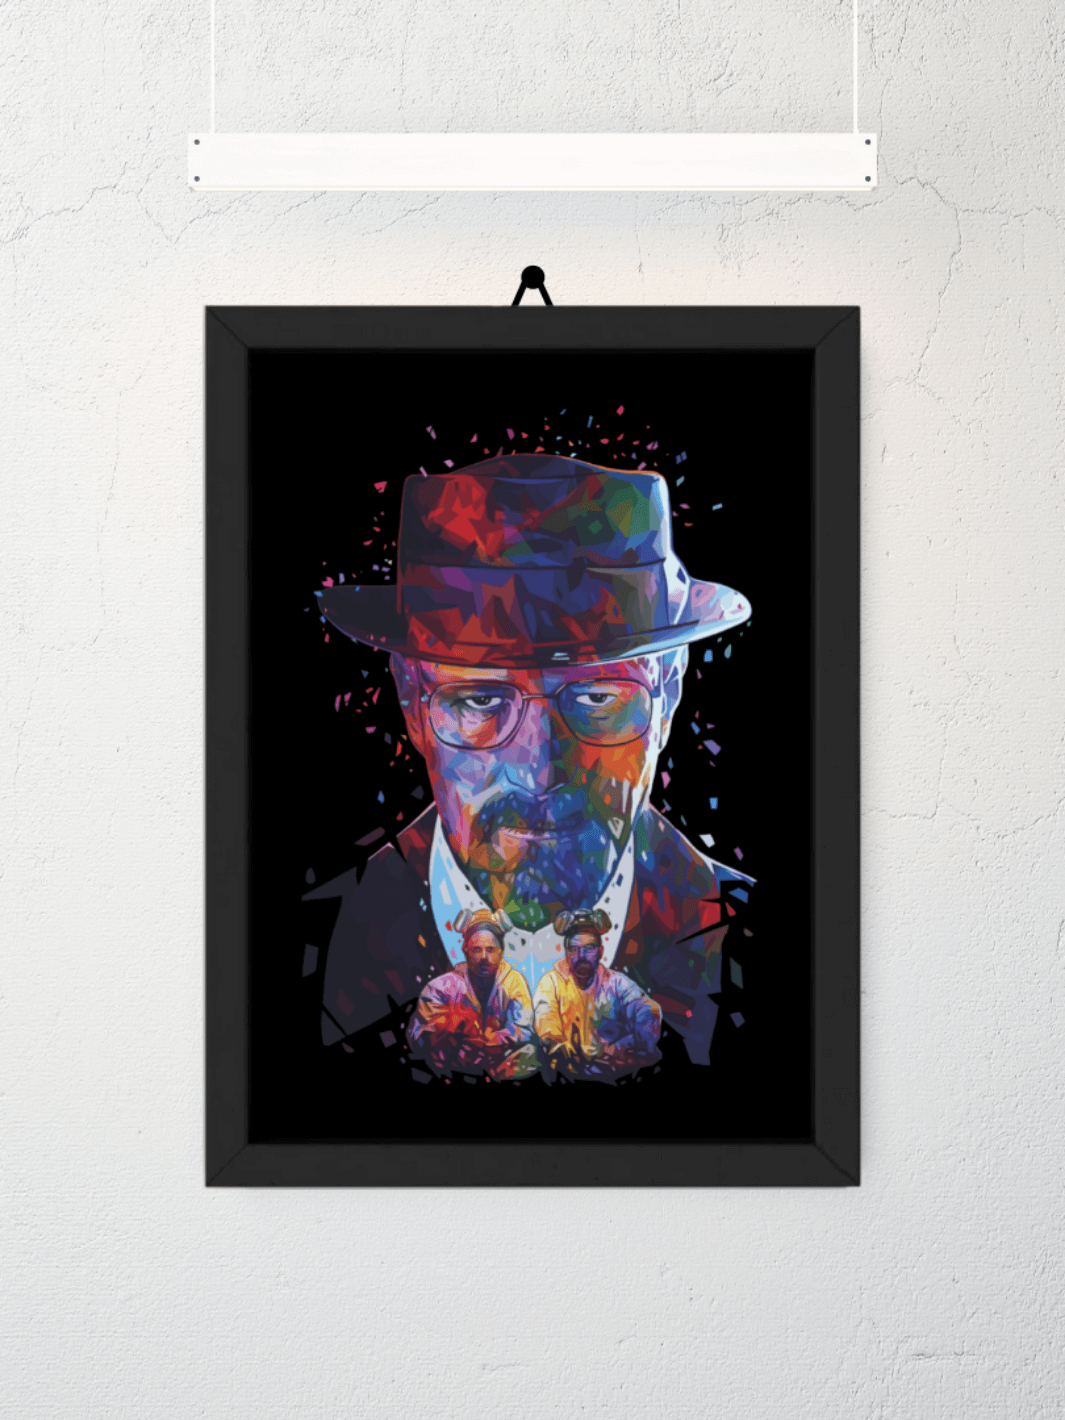 Poster Heisenberg di Breaking Bad by Alessandro Pautasso.